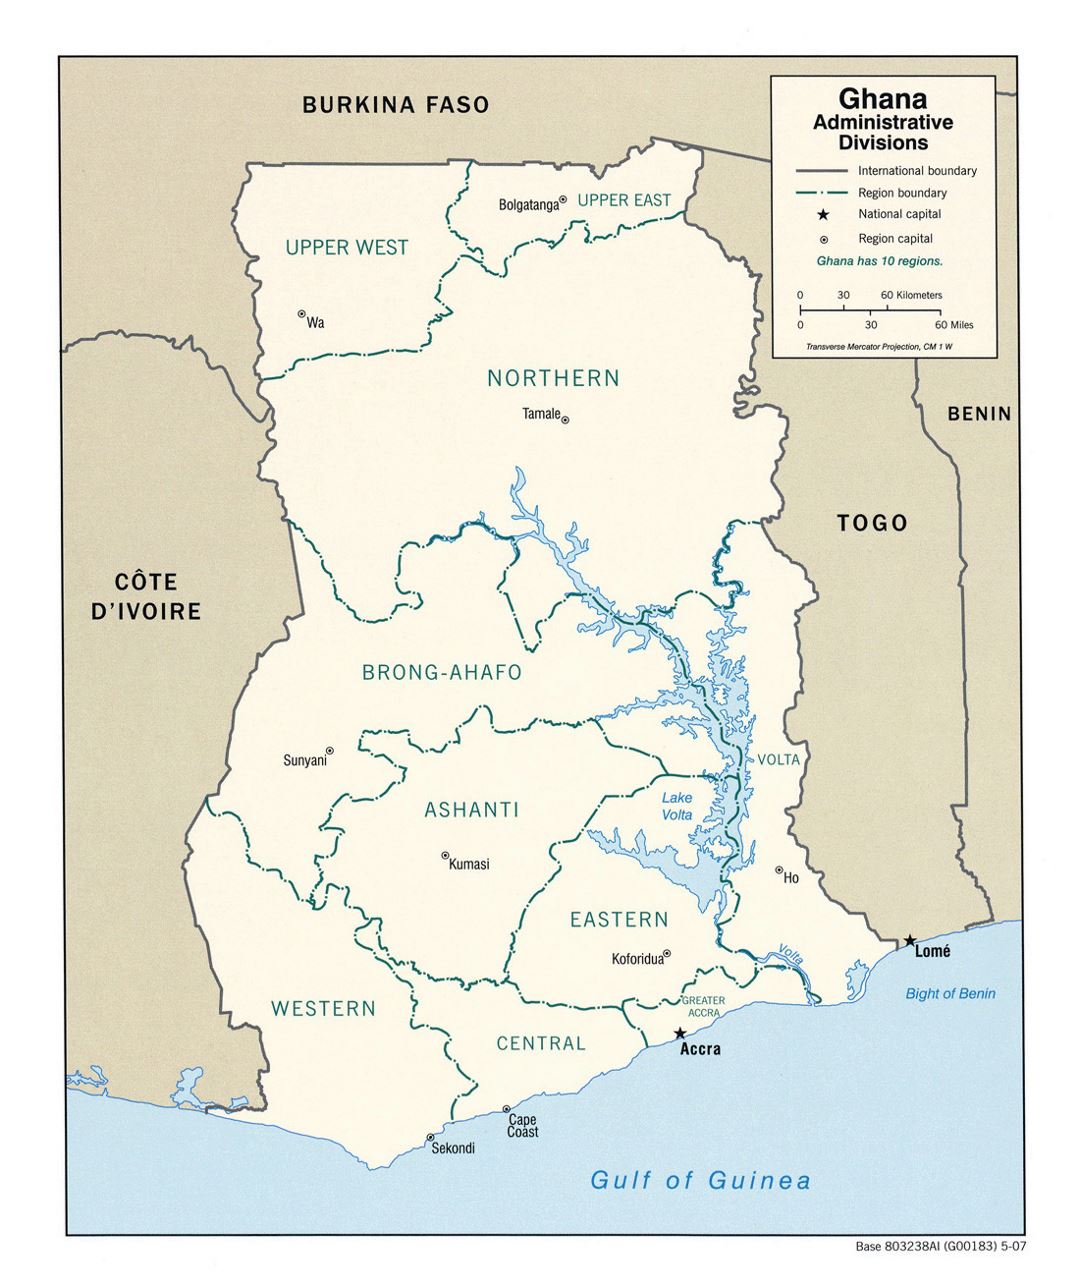 Detailed administrative divisions map of Ghana - 2007